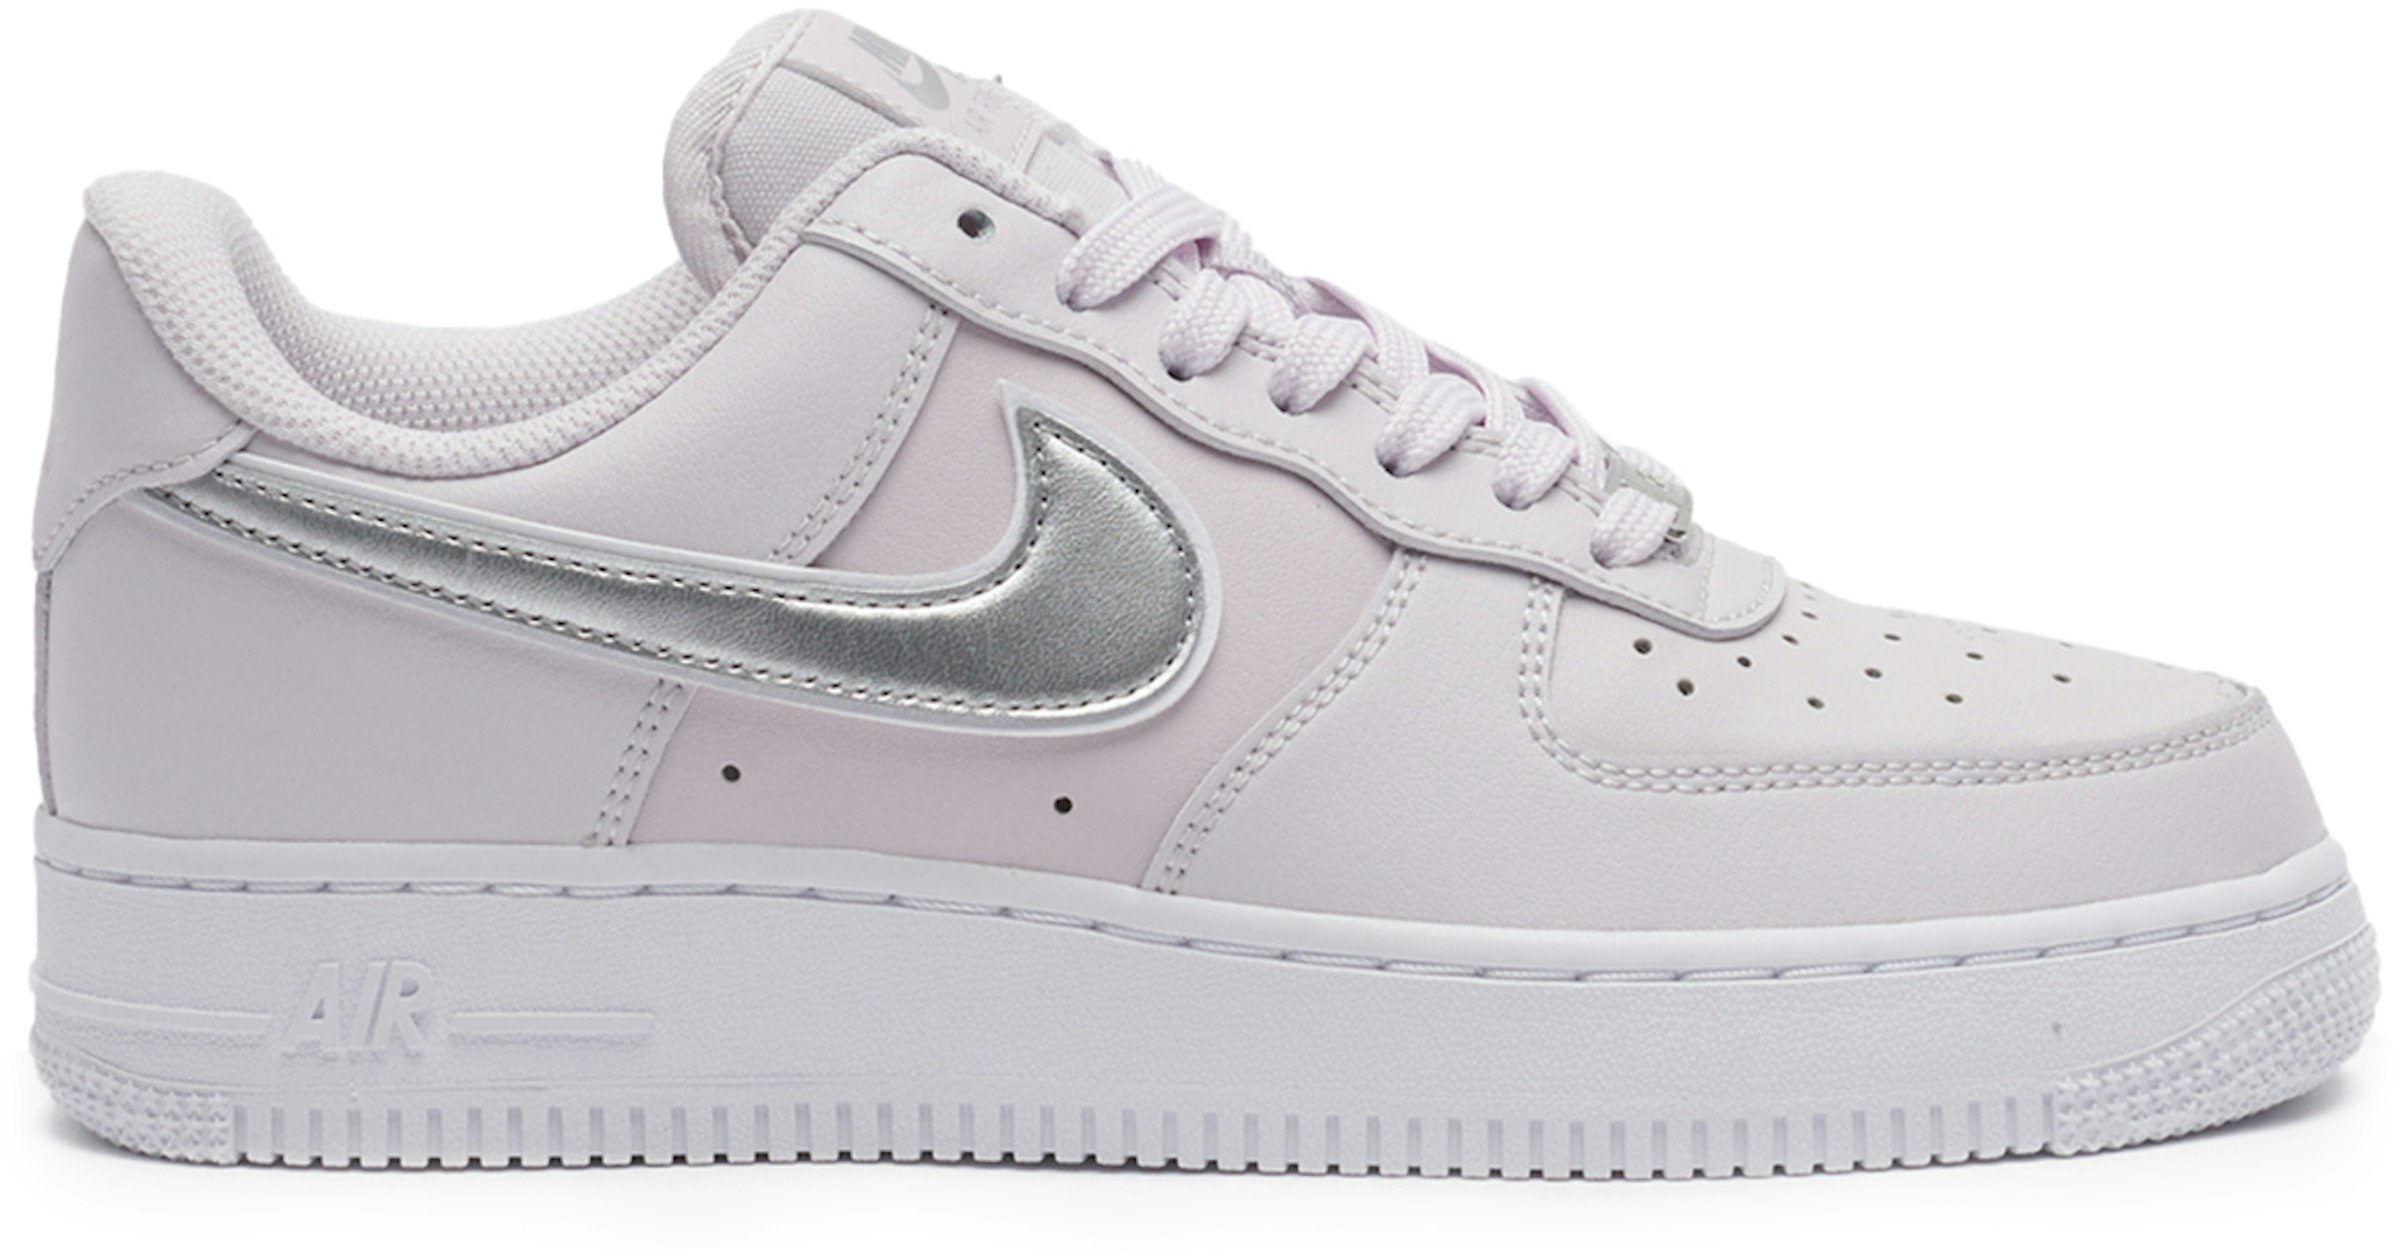 Contribuyente Orientar exposición Nike Air Force 1 Low Light Lilac Silver (Women's) - DD1523-500 - US